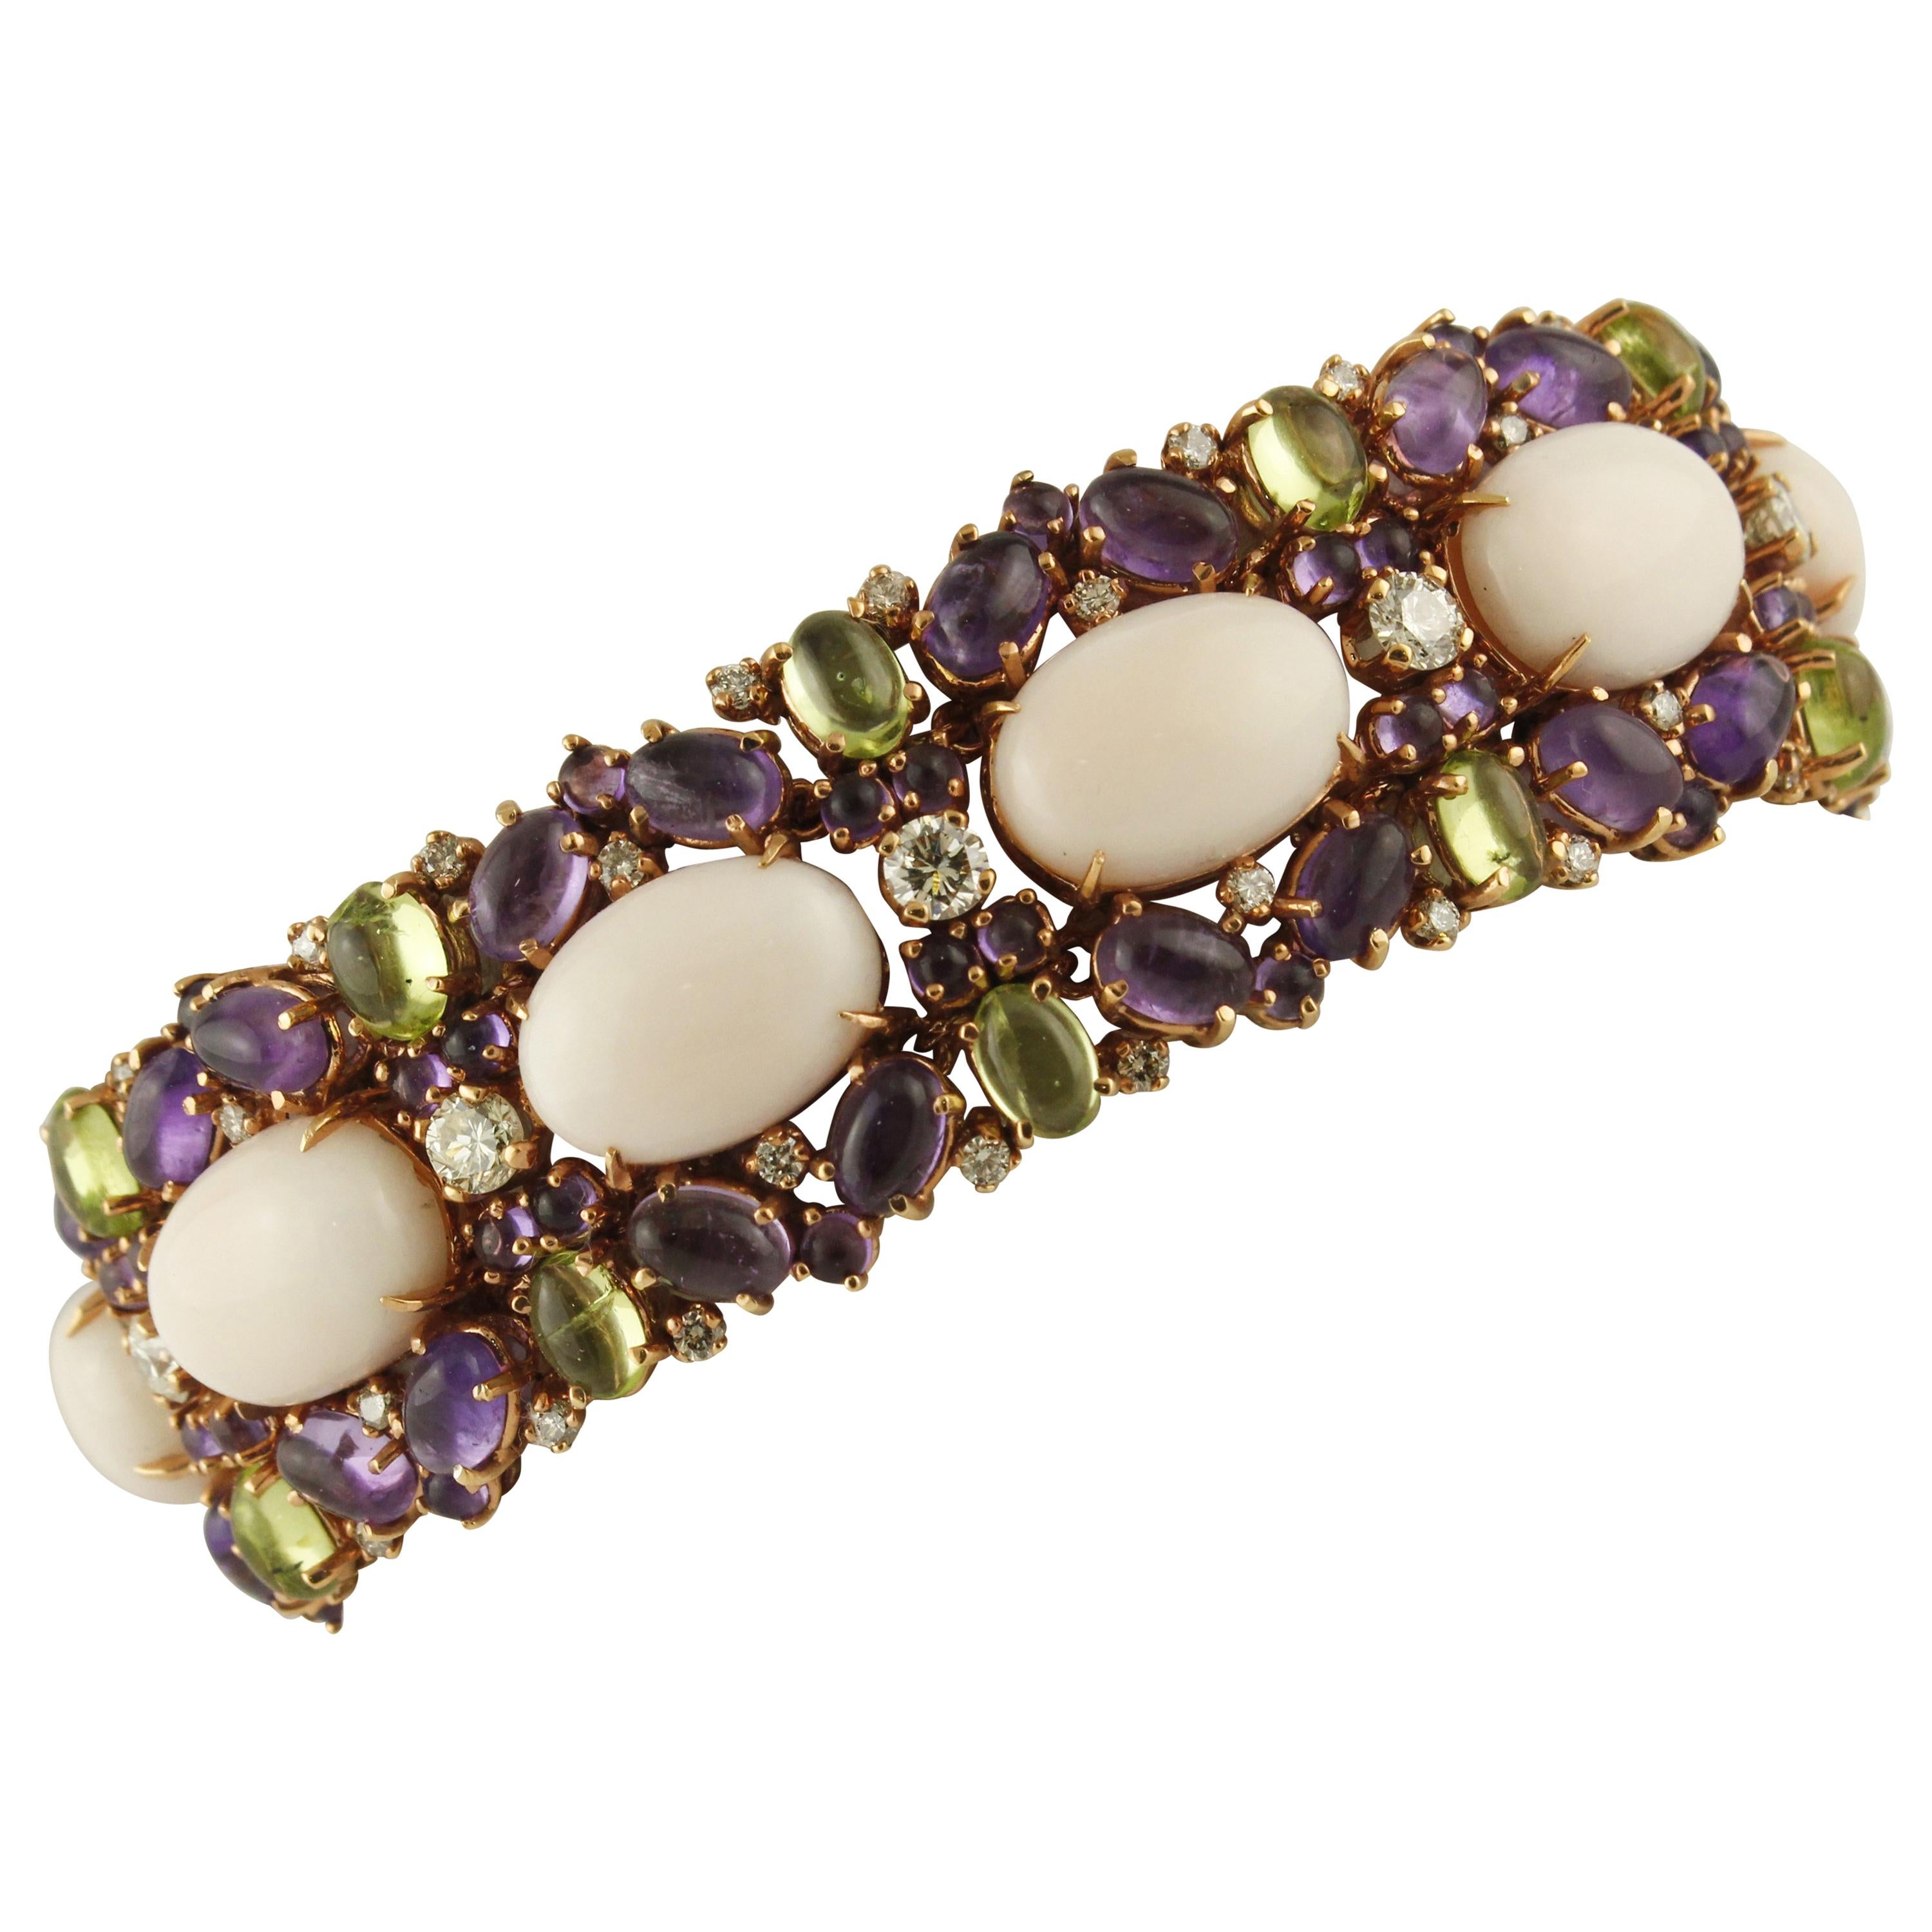 White Diamonds Amethysts Peridots Pink Corals Rose Gold Link Bracelet For Sale